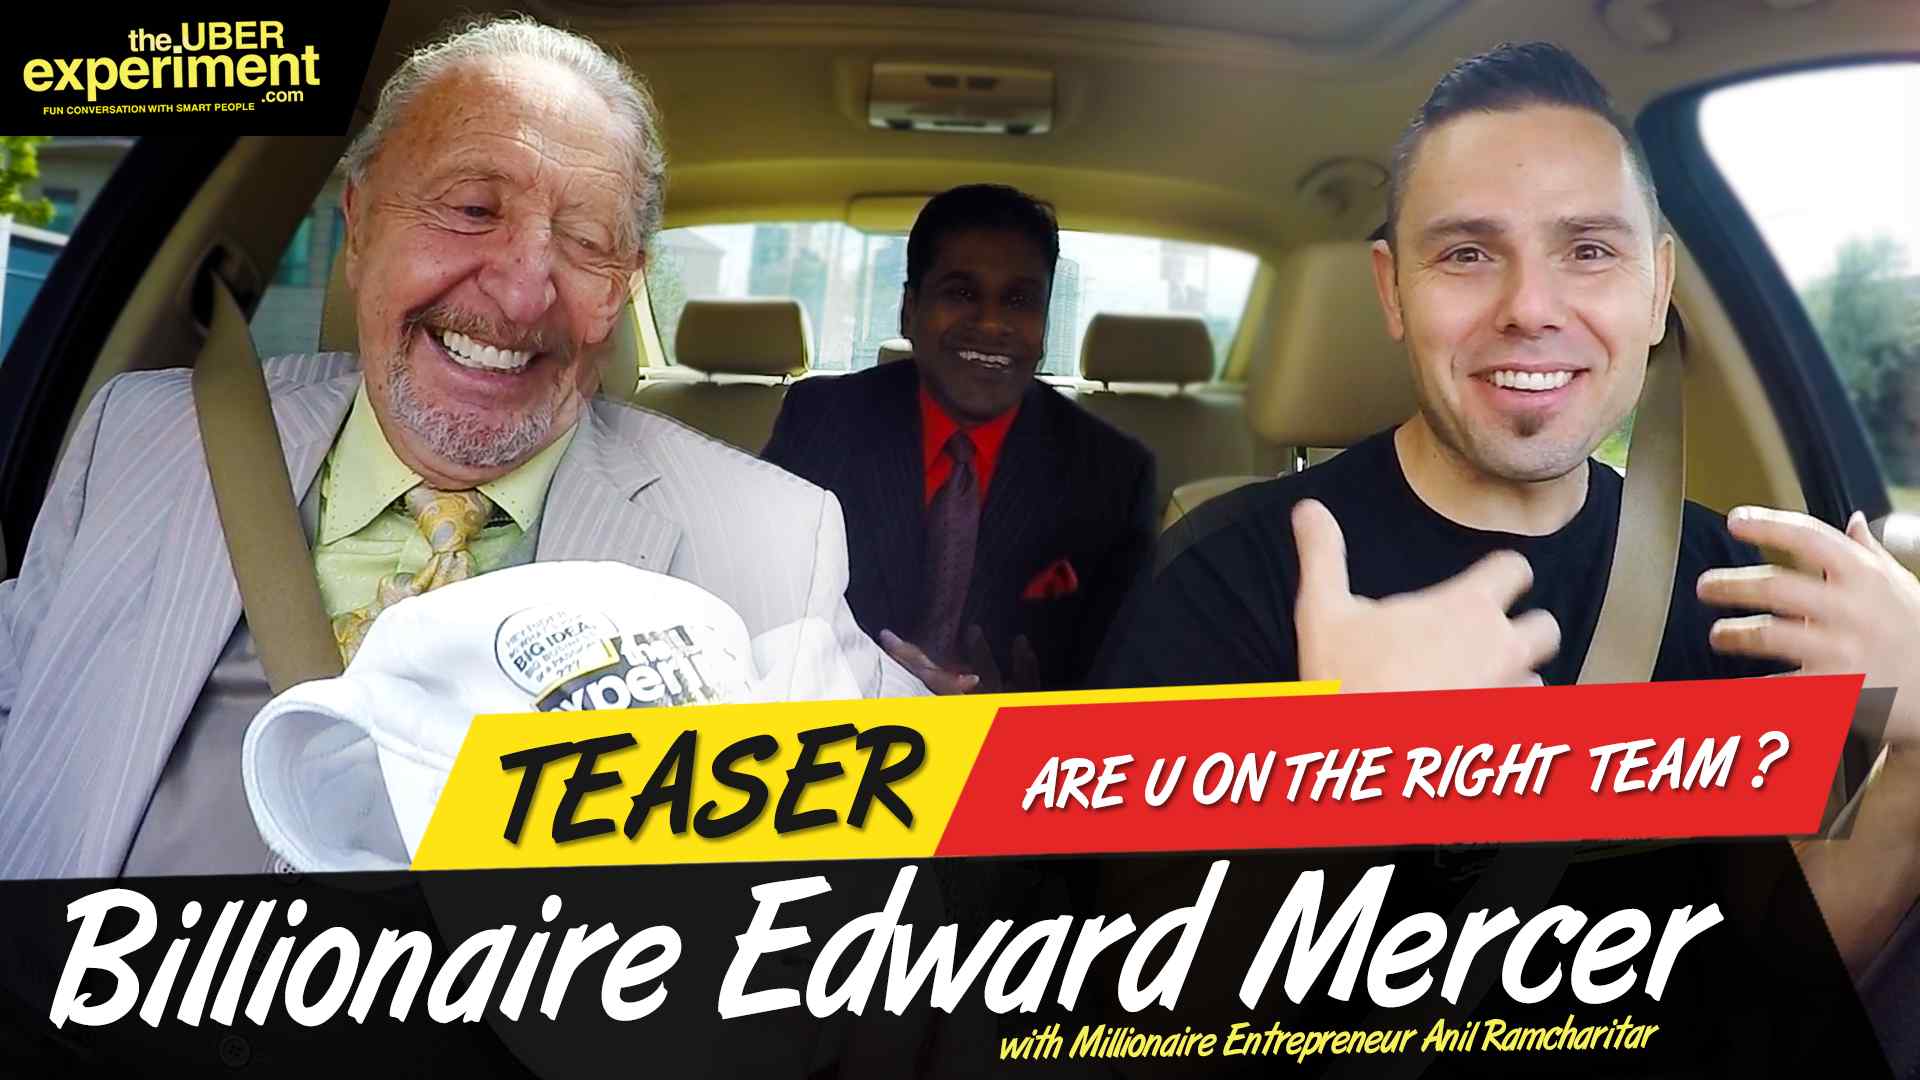 ARE U ON THE RIGHT TEAM? - Billionaire Edward Mercer on The UBER Experiment Reality Talk Show